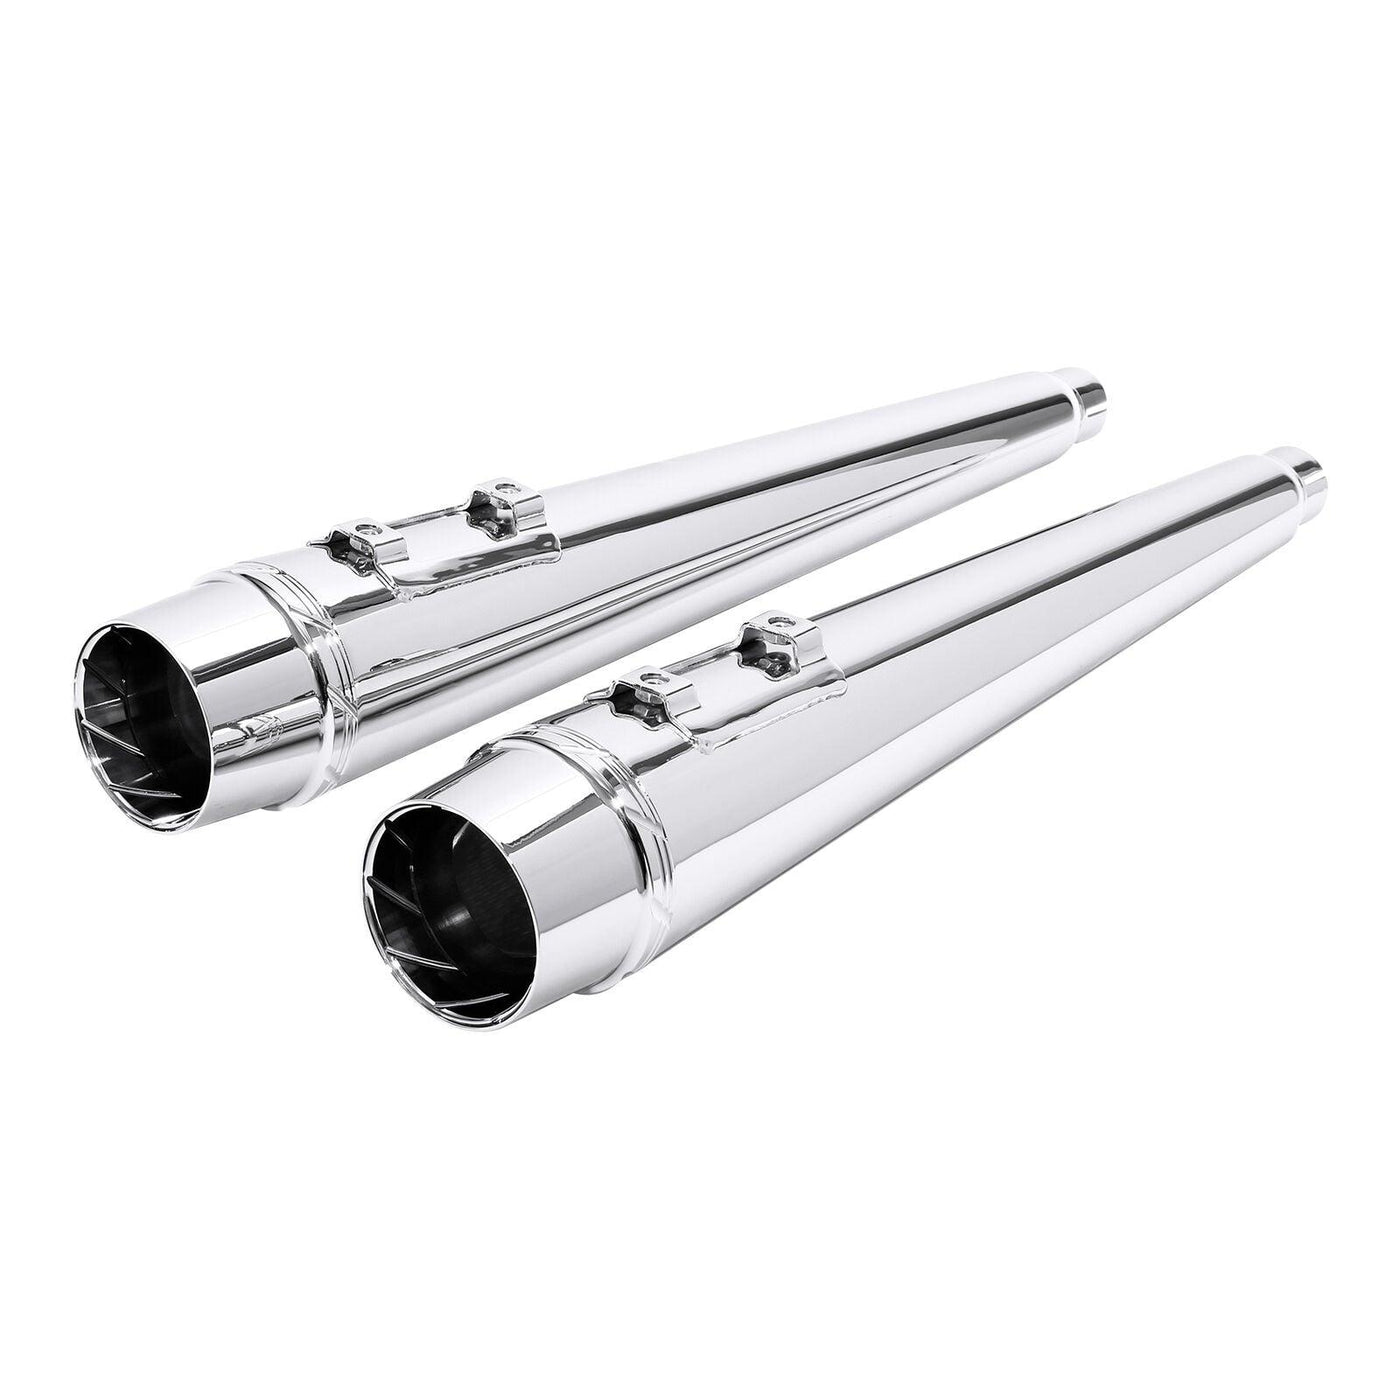 4'' Megaphone Slip-on Silencers Exhaust Pipe Fit For Harley Touring Glide 95-16 - Moto Life Products